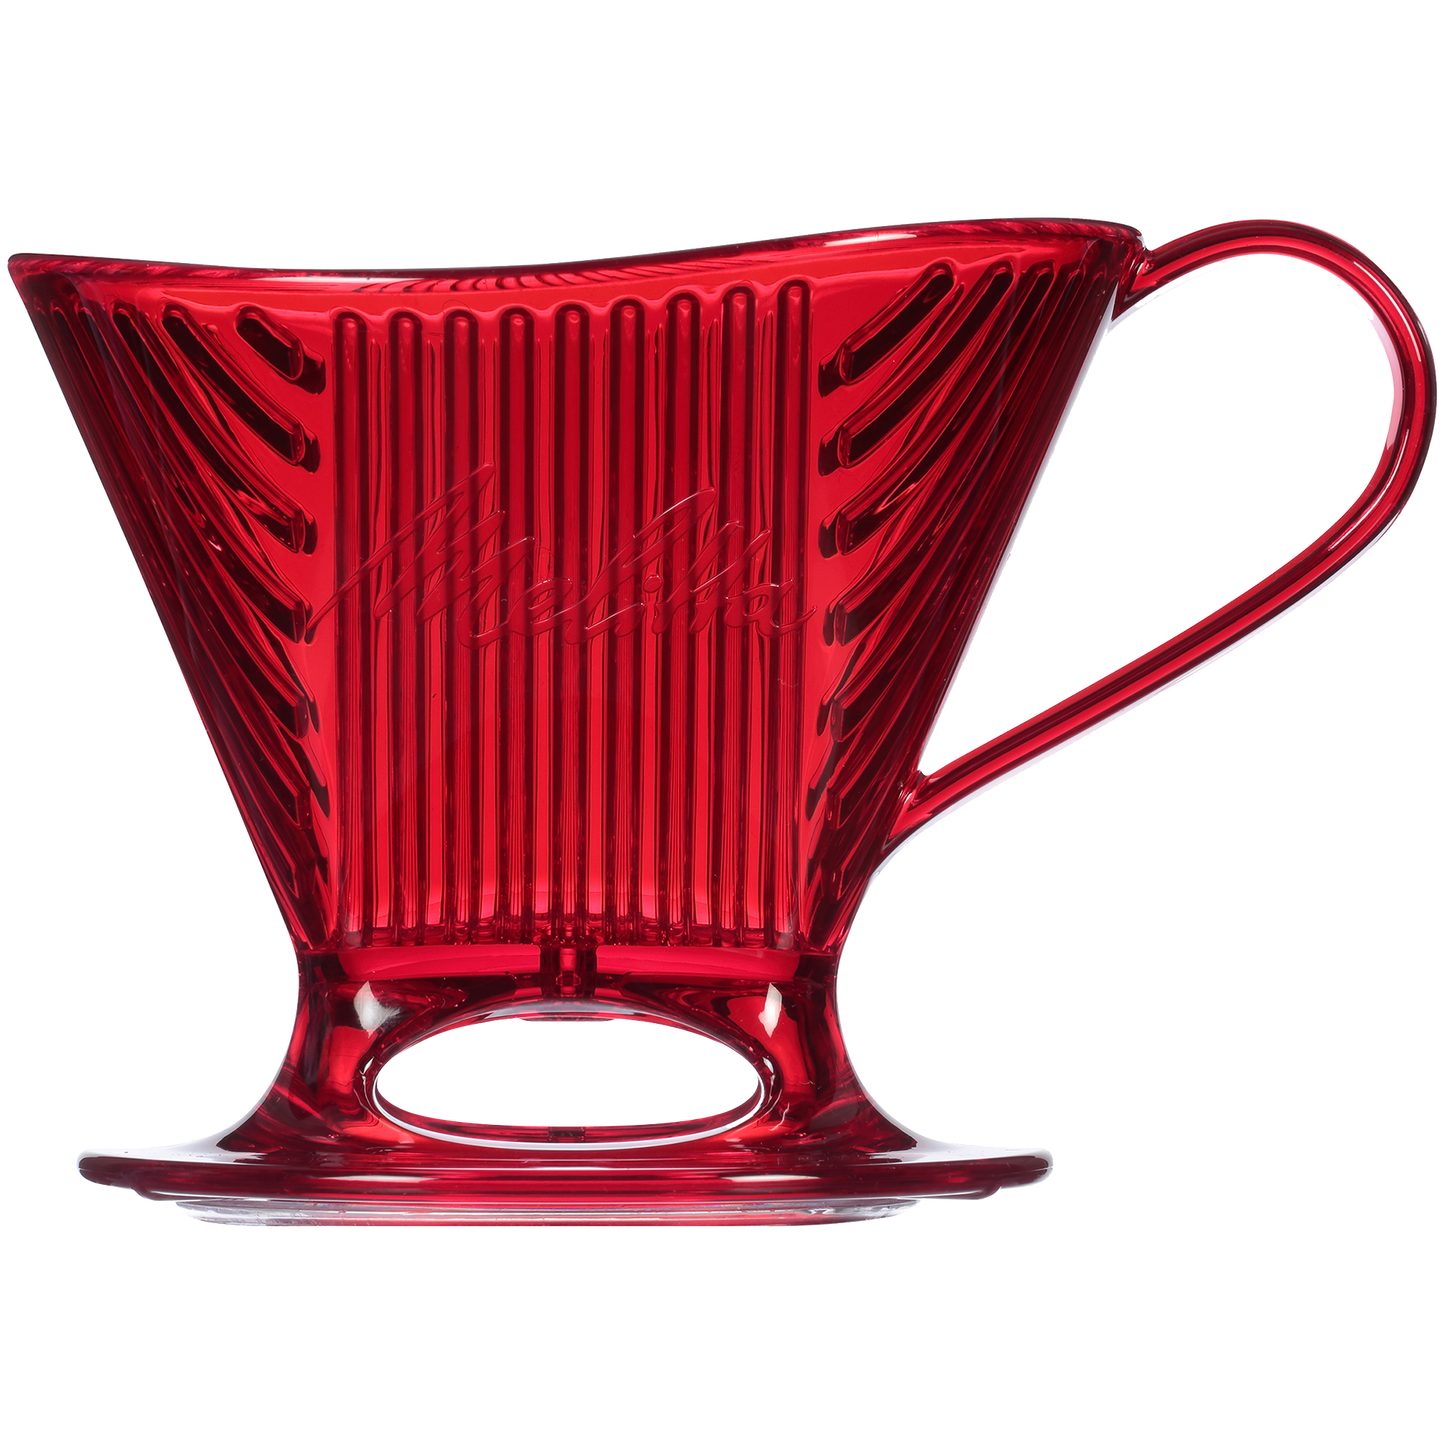 Signature Series 1-Cup Pour-Over Coffeemaker - Tritan™ Translucent Red